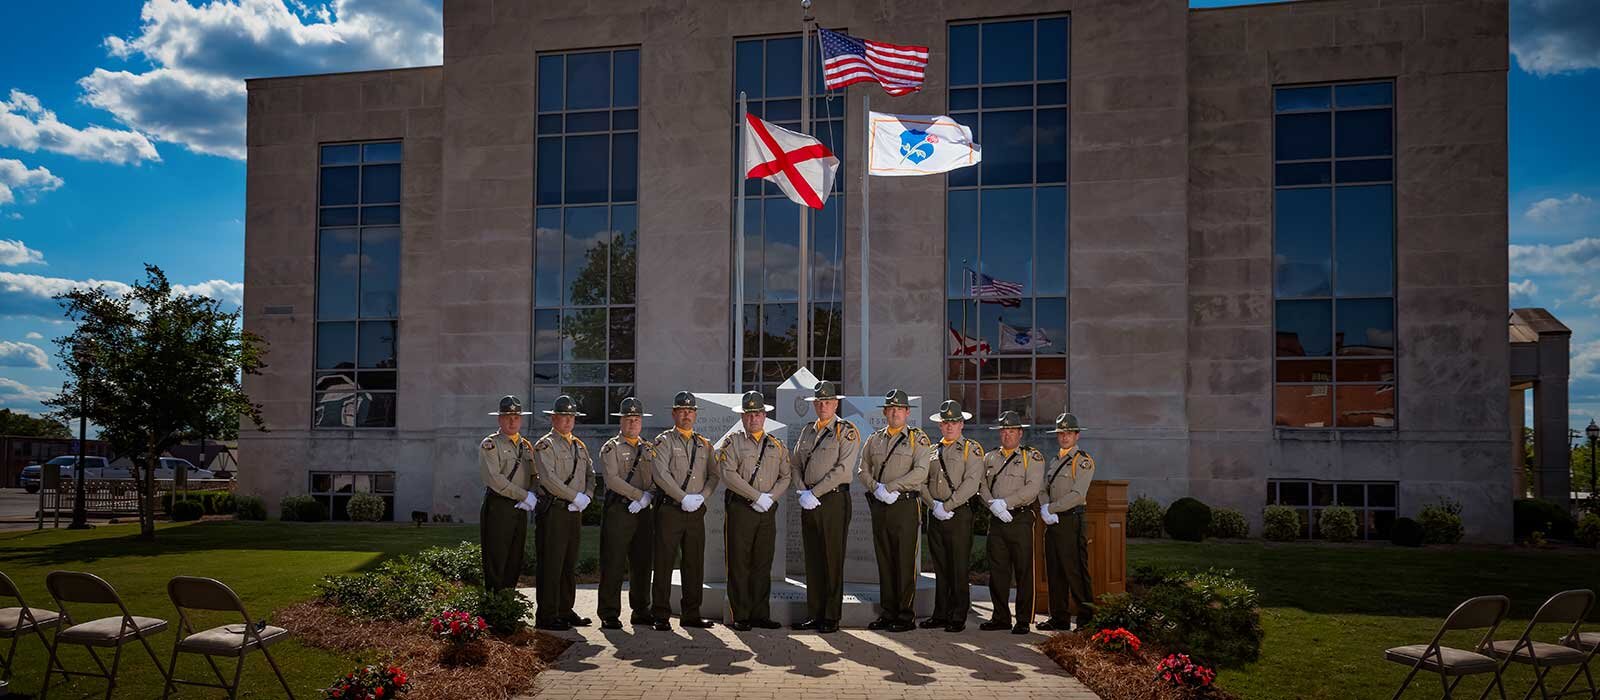 Sheriff's Office staff in front of courthouse